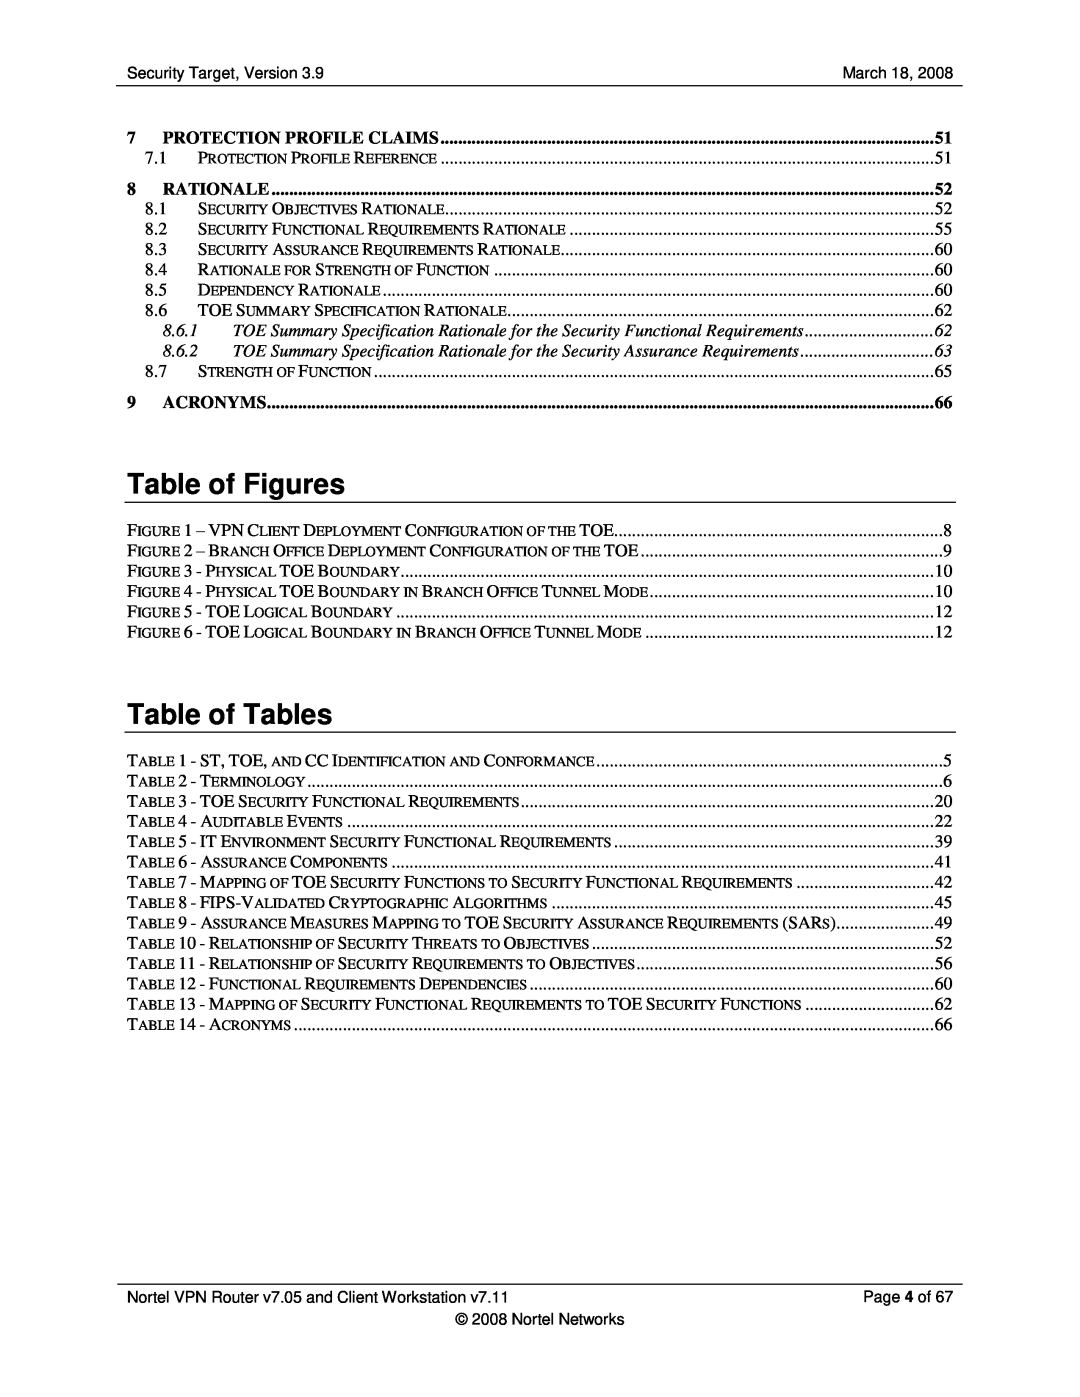 Nortel Networks 7.05, 7.11 manual Table of Figures, Table of Tables, Protection Profile Claims, Rationale, Acronyms 